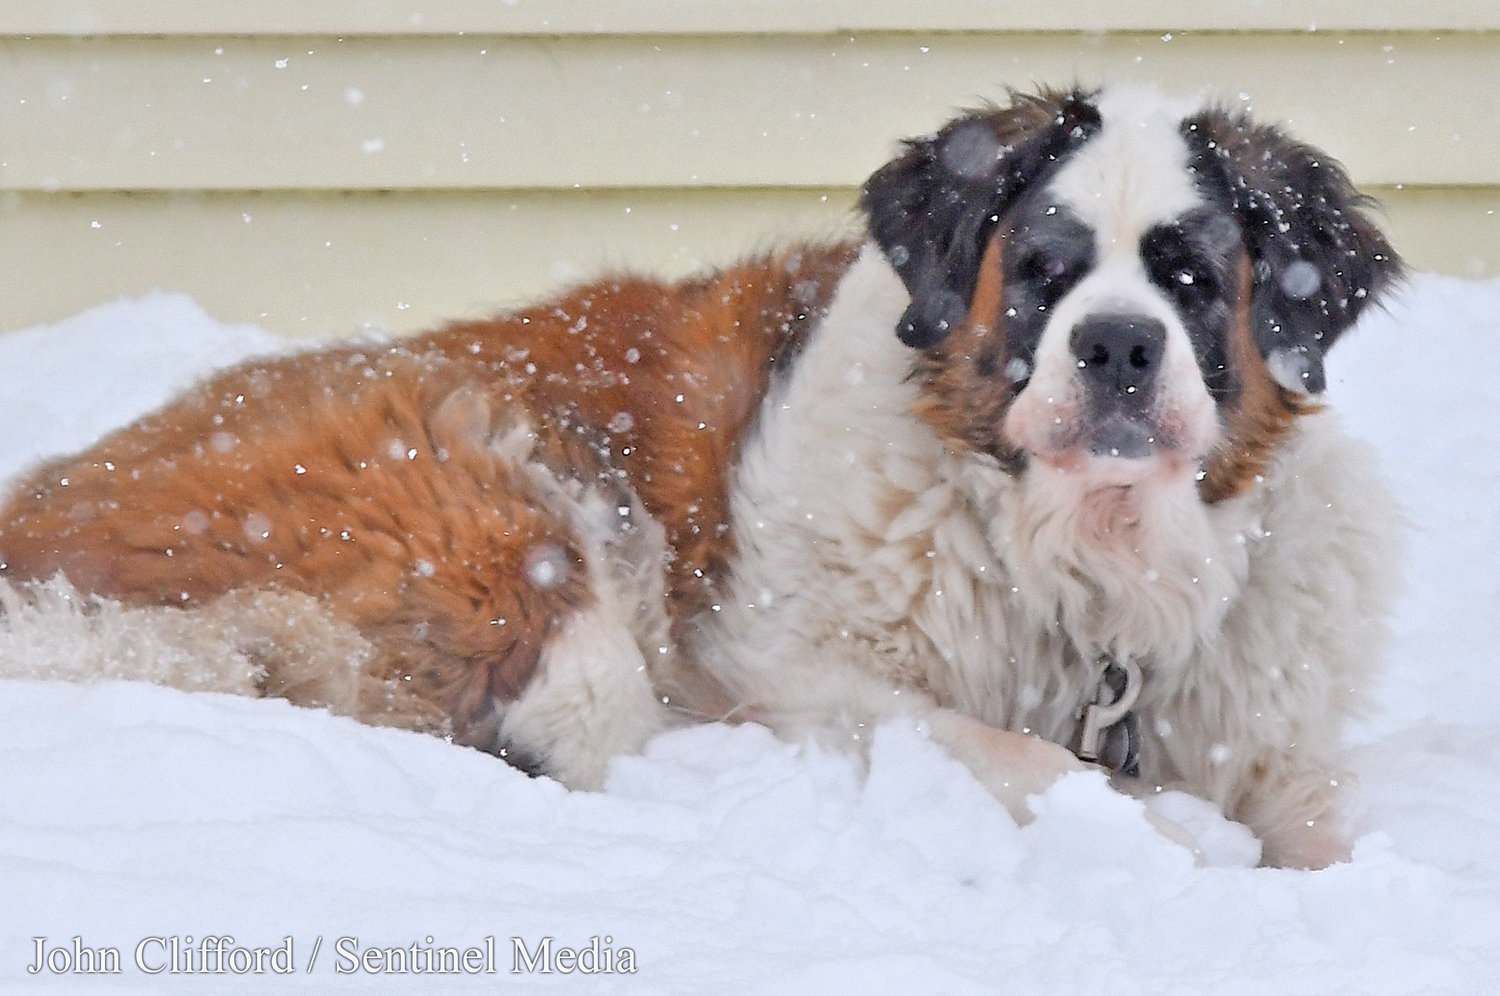 A nine-year-old Saint Bernard, Jax, at the corner of Crossgates Road and North Crescent Dr. enjoys the snow Tuesday, March 14, 2023.